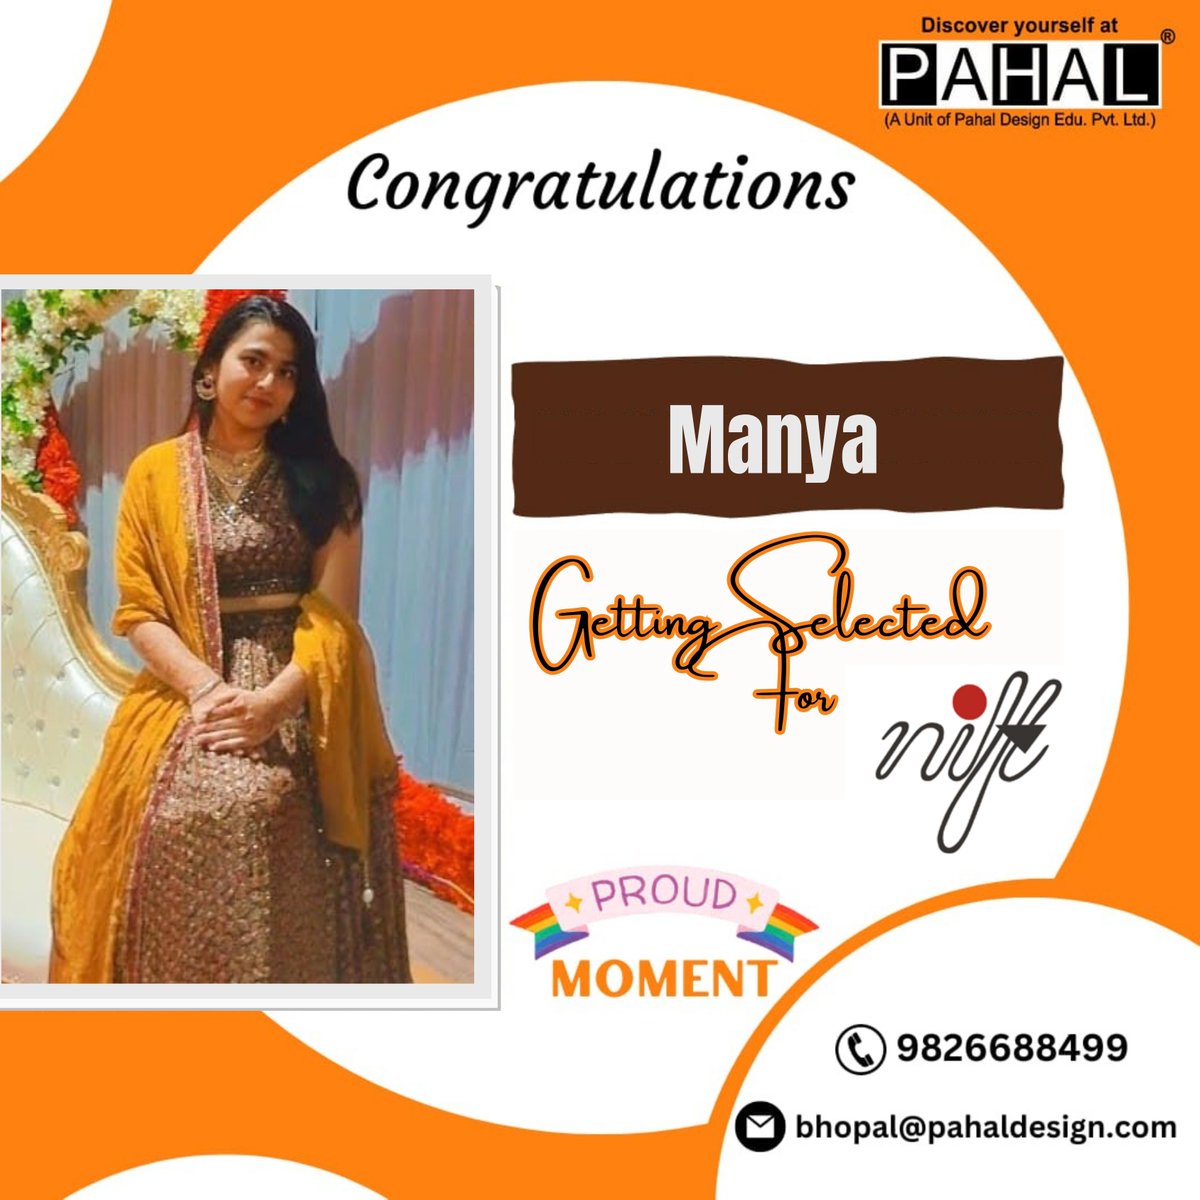 🎉🎉Congratulations to Manya on Getting Selected for NIFT.
Reach Us:
✉️ bhopal@pahaldesign.com
📞 9826688499, 7828271160
#congratulations #proudmoment #nift #nationalinstituteofdesign #design #designer #achievement #endeavors  #pahal_bhopal #pahaldesign #design #pahaldesignbhopal